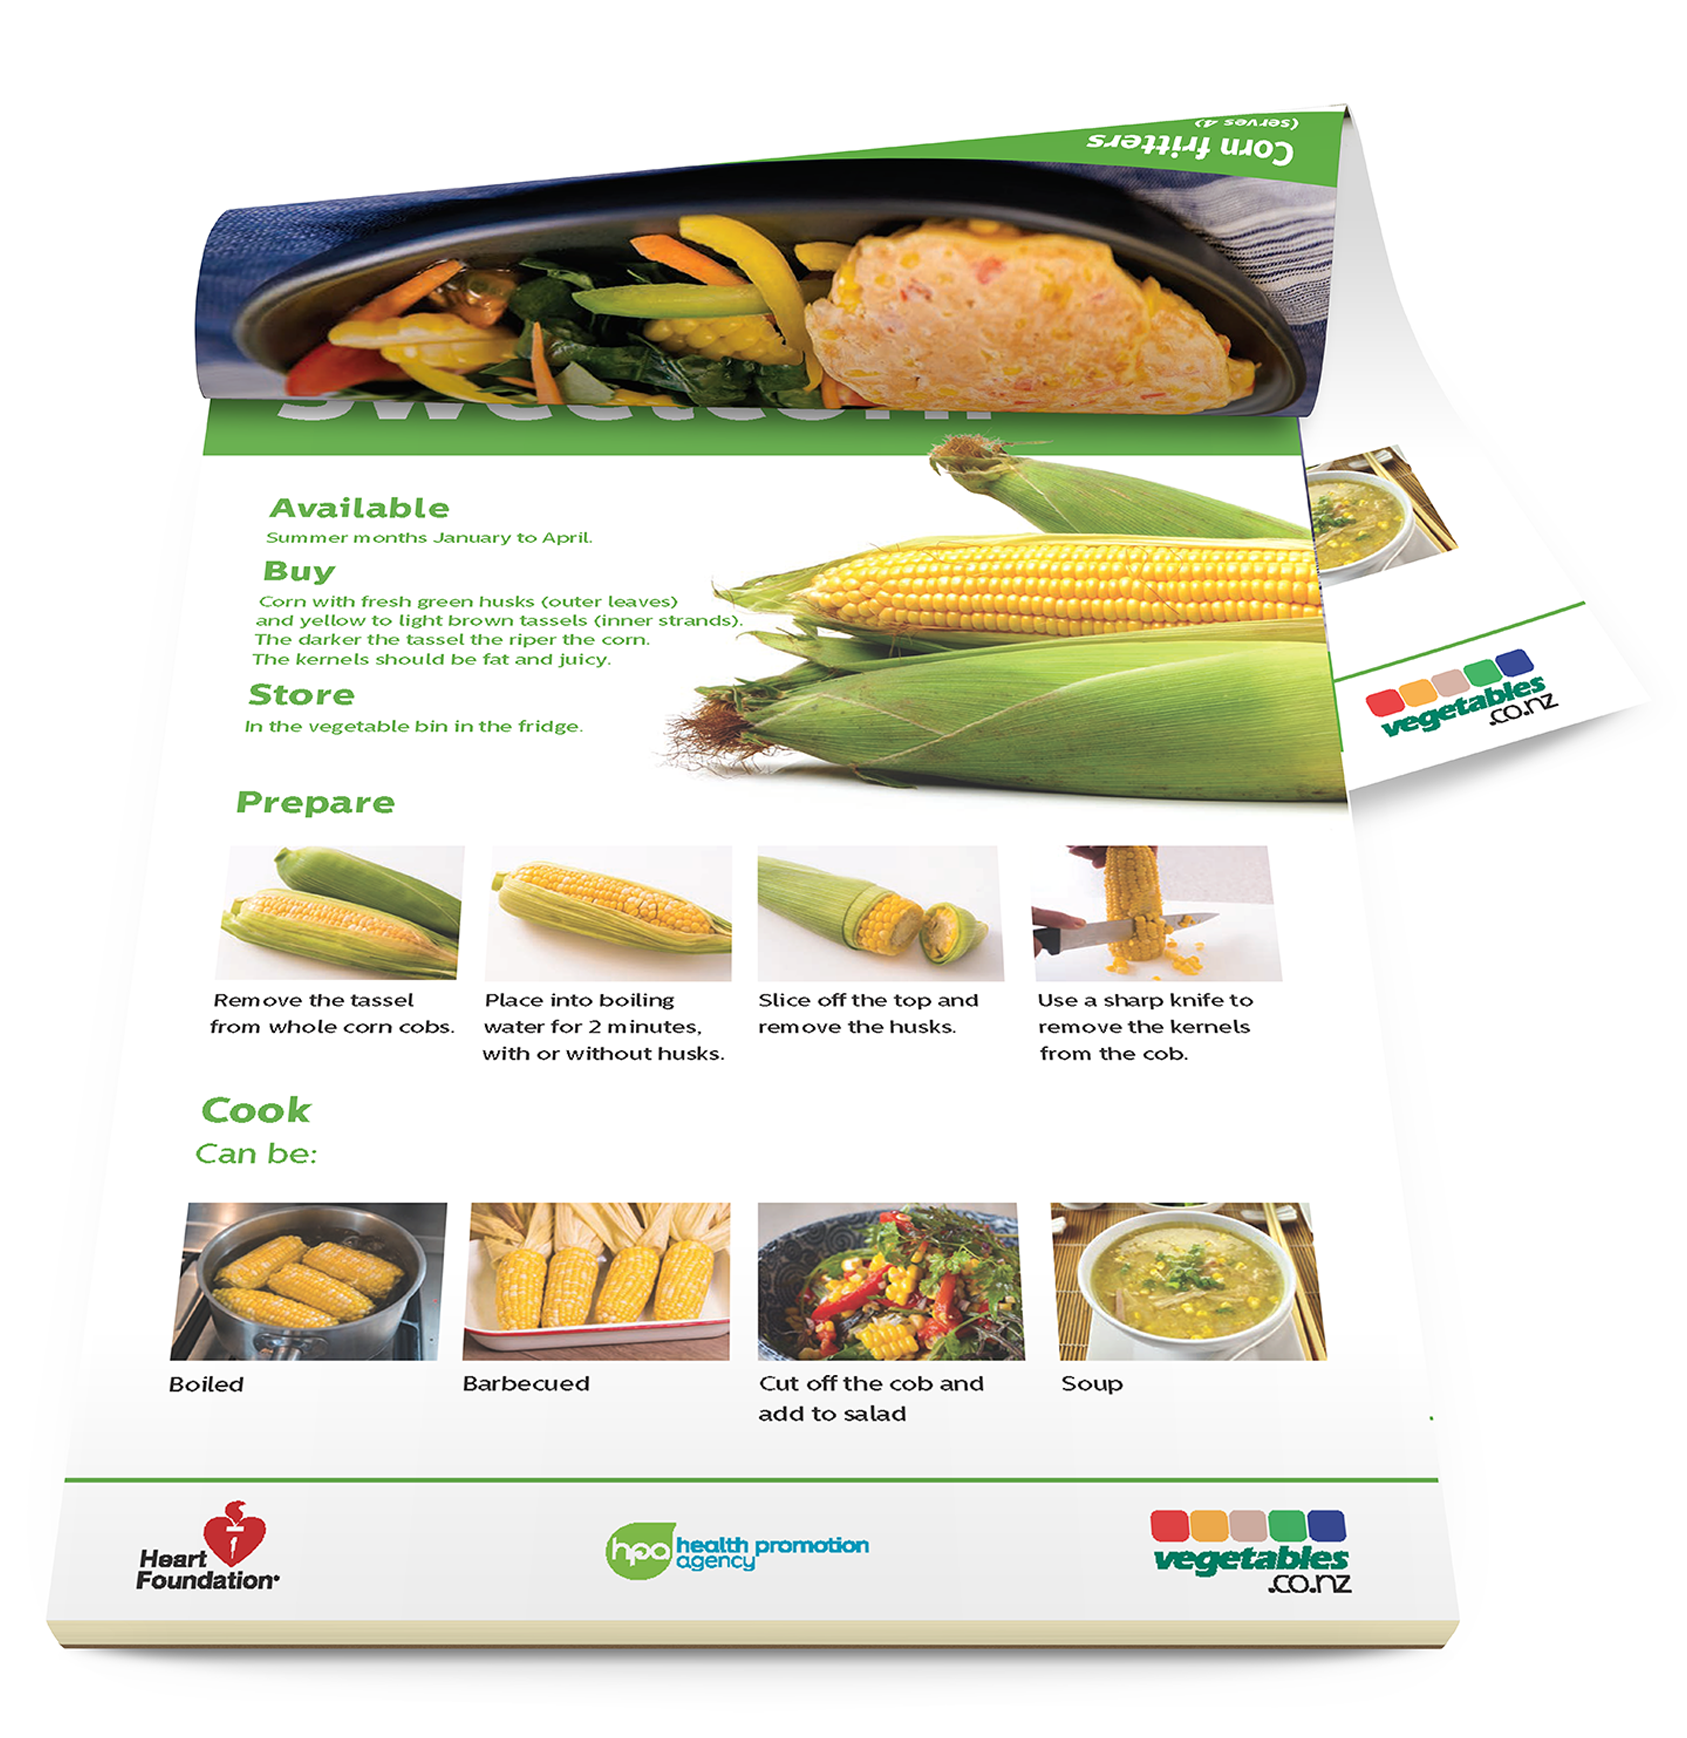 Easy meals with vegetables: Sweetcorn - Digital only